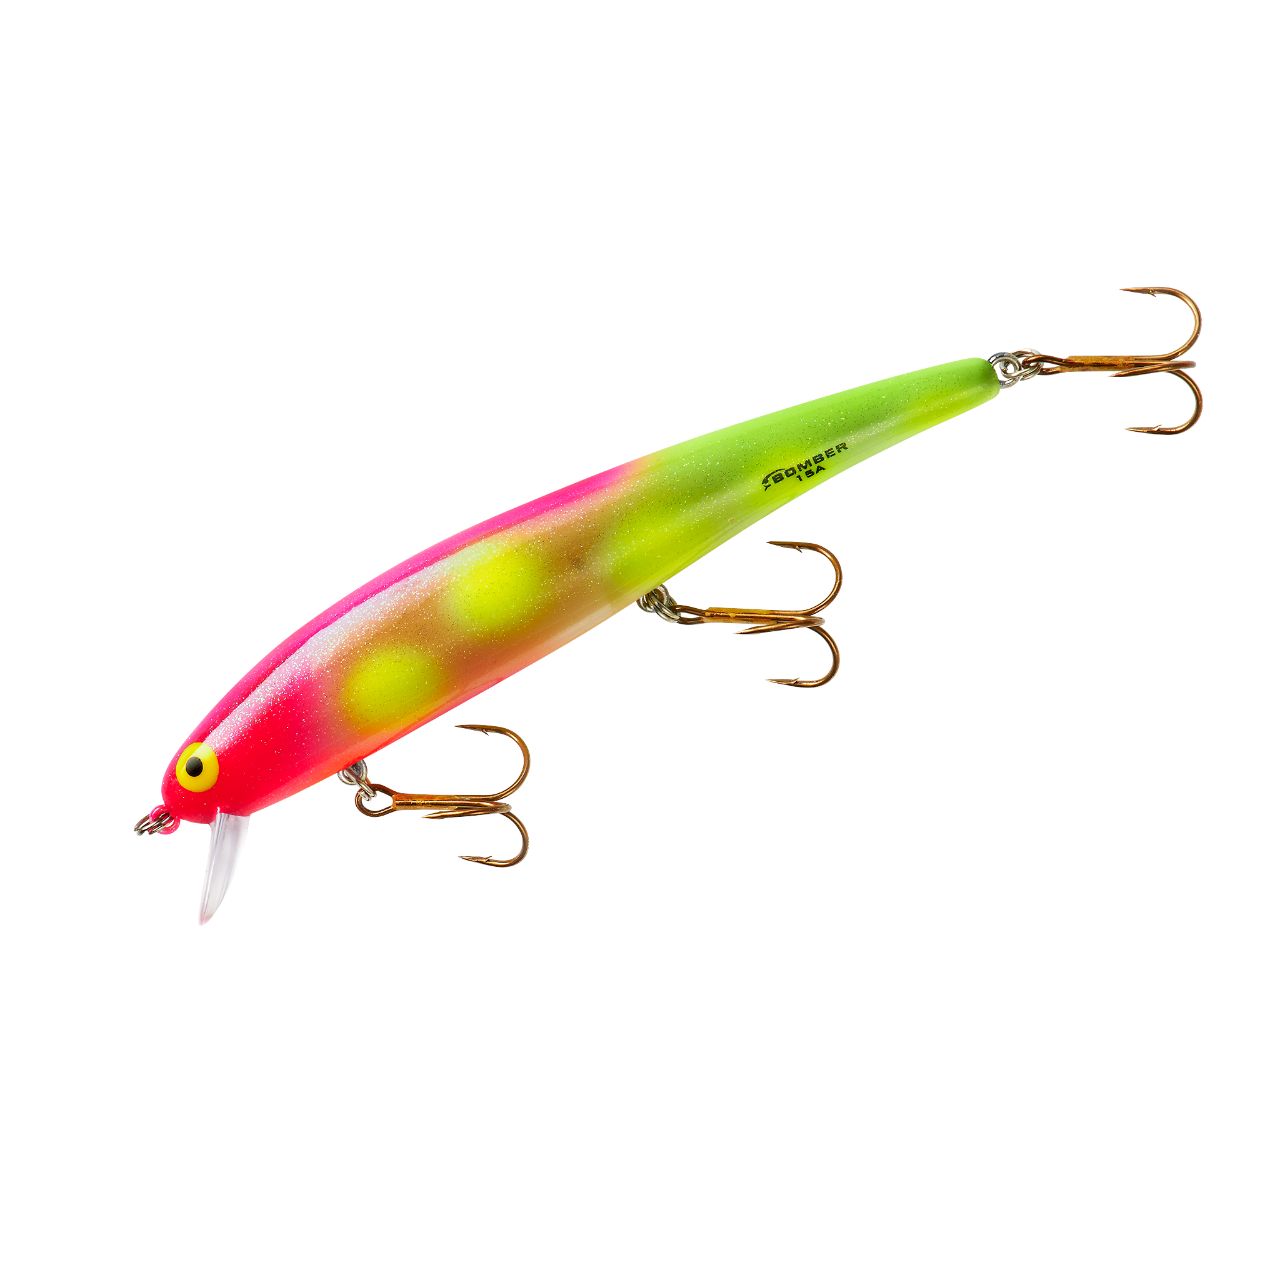 bomber lures, bomber lures Suppliers and Manufacturers at